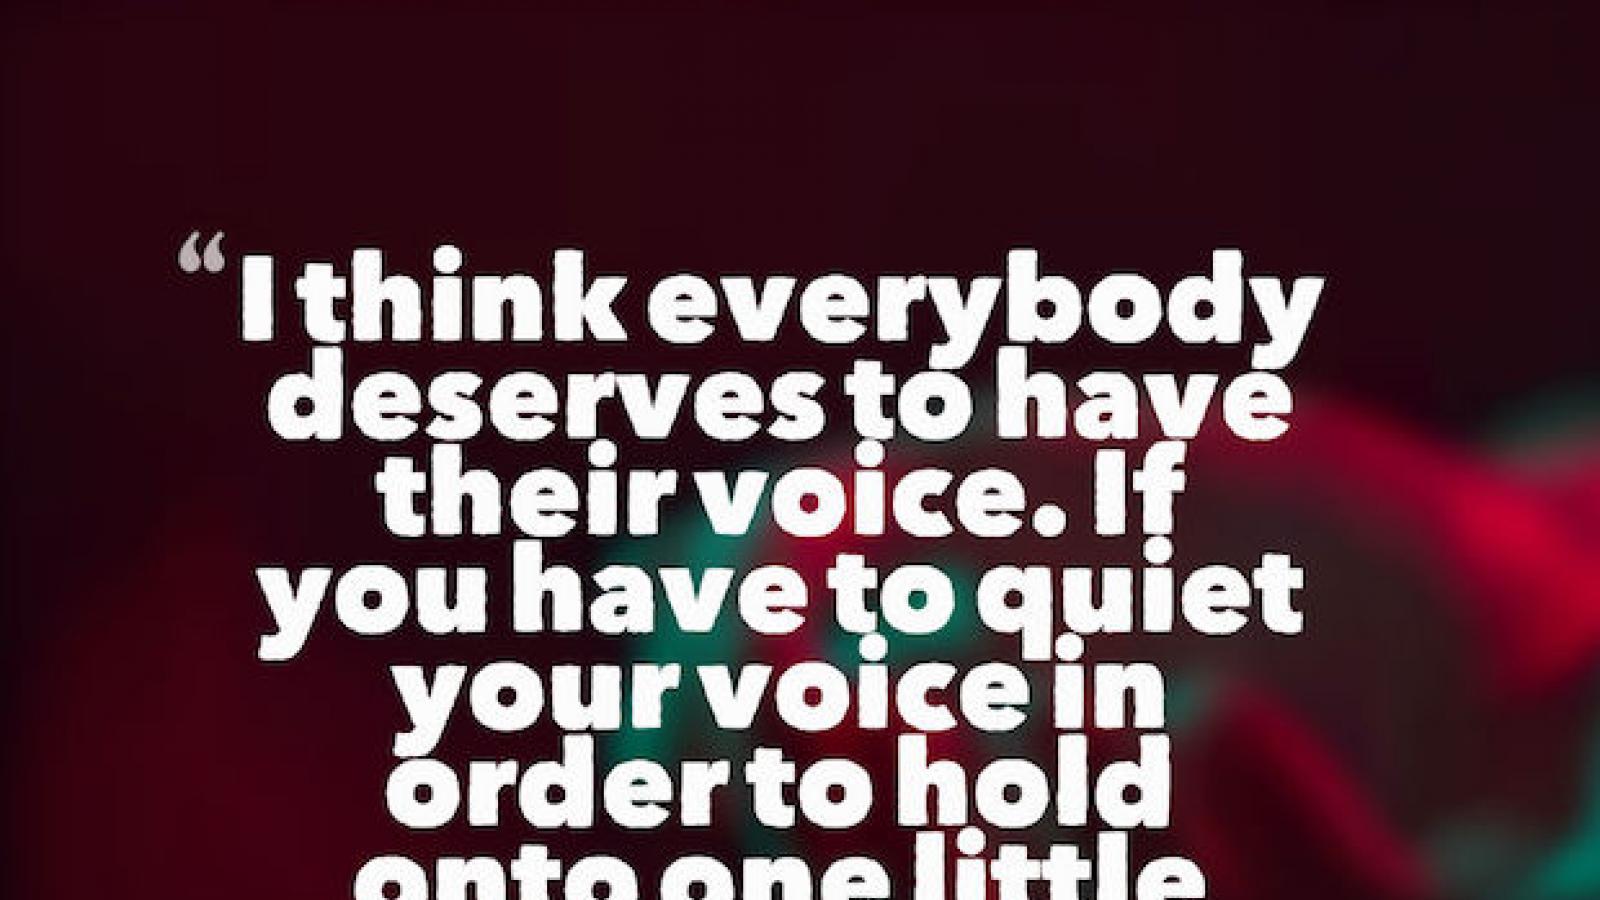 Quote by Constance Wu I think everybody deserves to have their voice. If you have to quiet your voice in order to hold onto one little thing, what are you really holding onto?